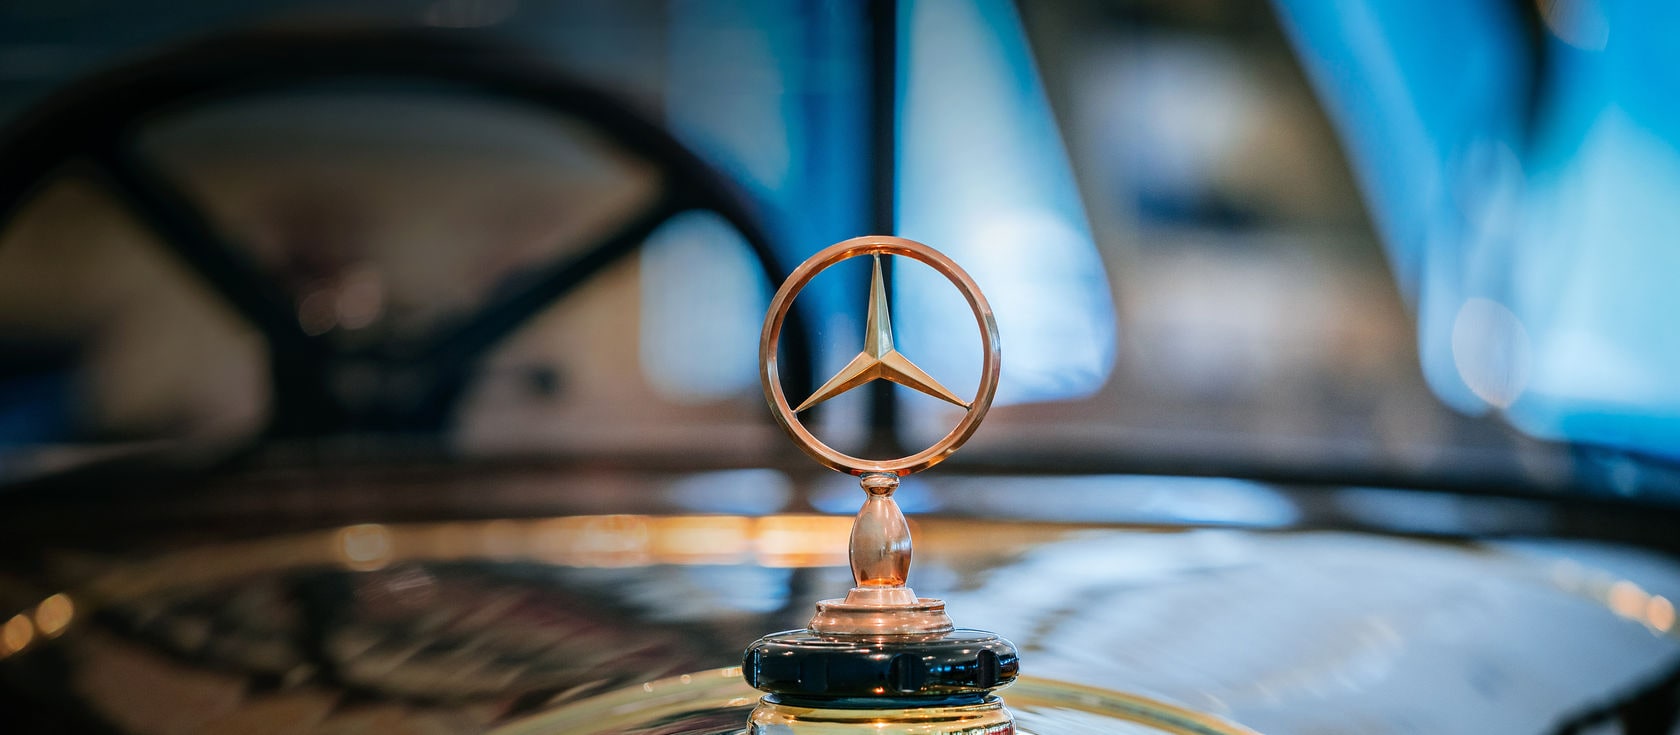 Mercedes-Benz celebrates 100 years of its three-pointed star logo